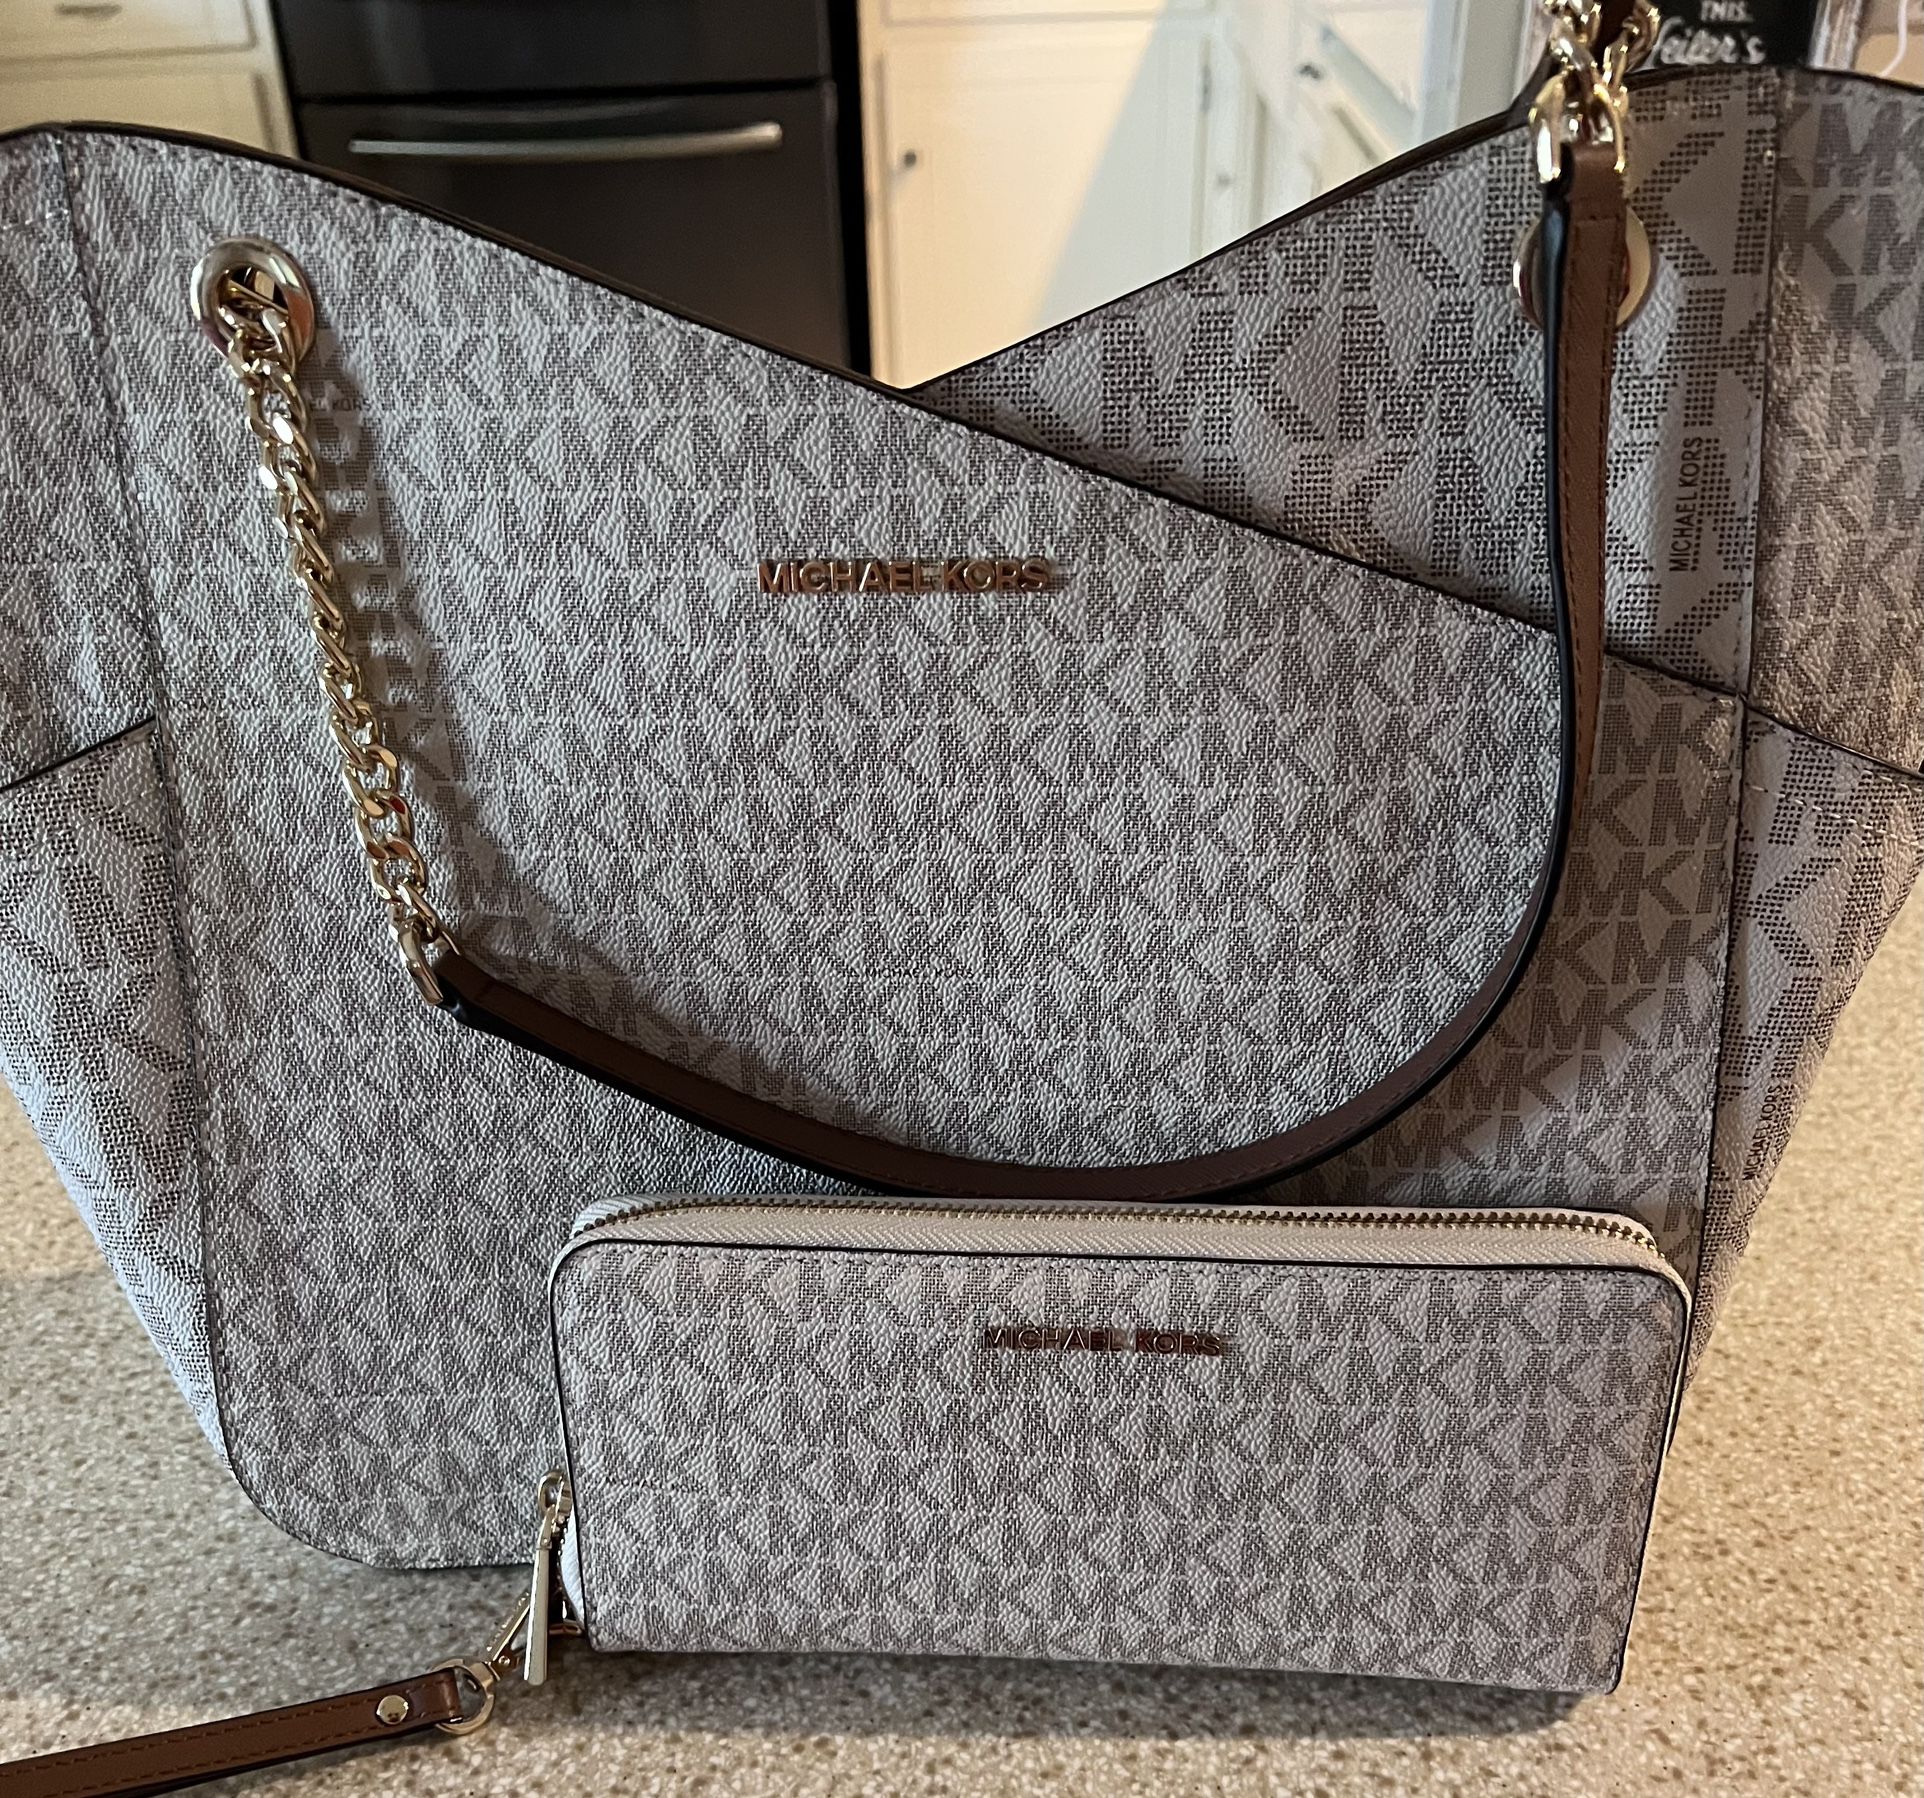 Michael Kors wallet and purse 